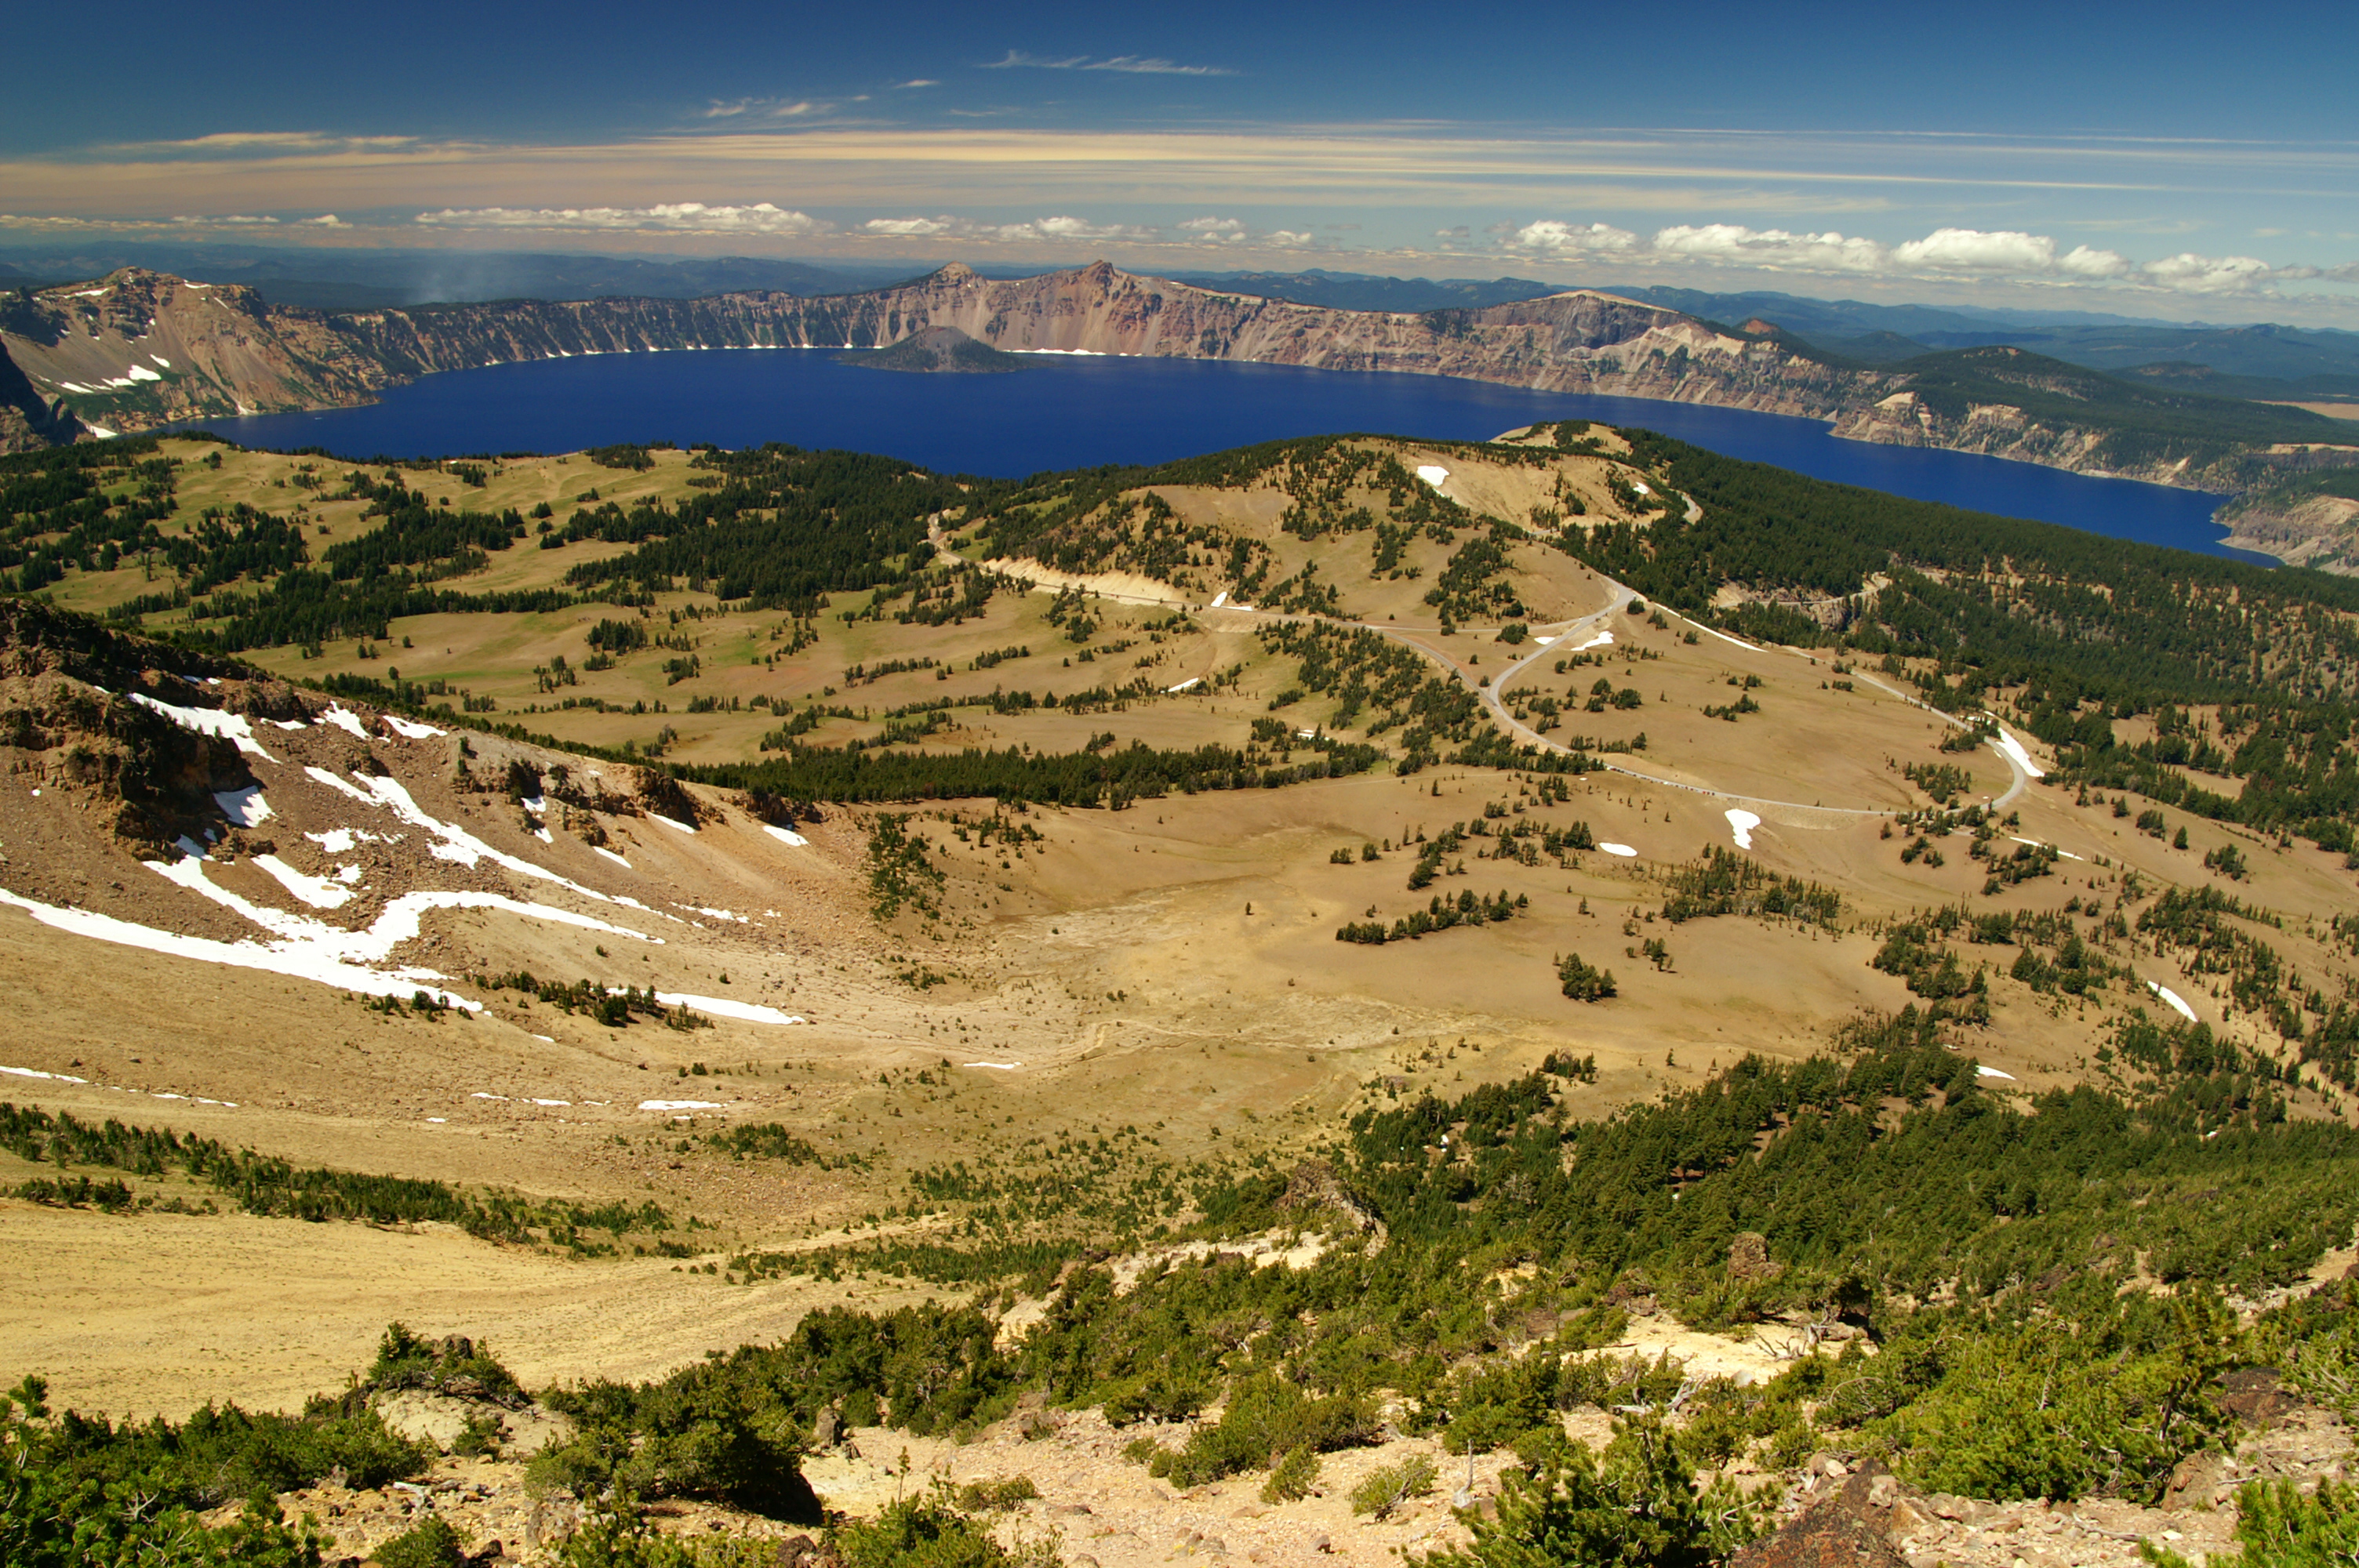 Crater Lake as seen from the summit of Mt. Scott